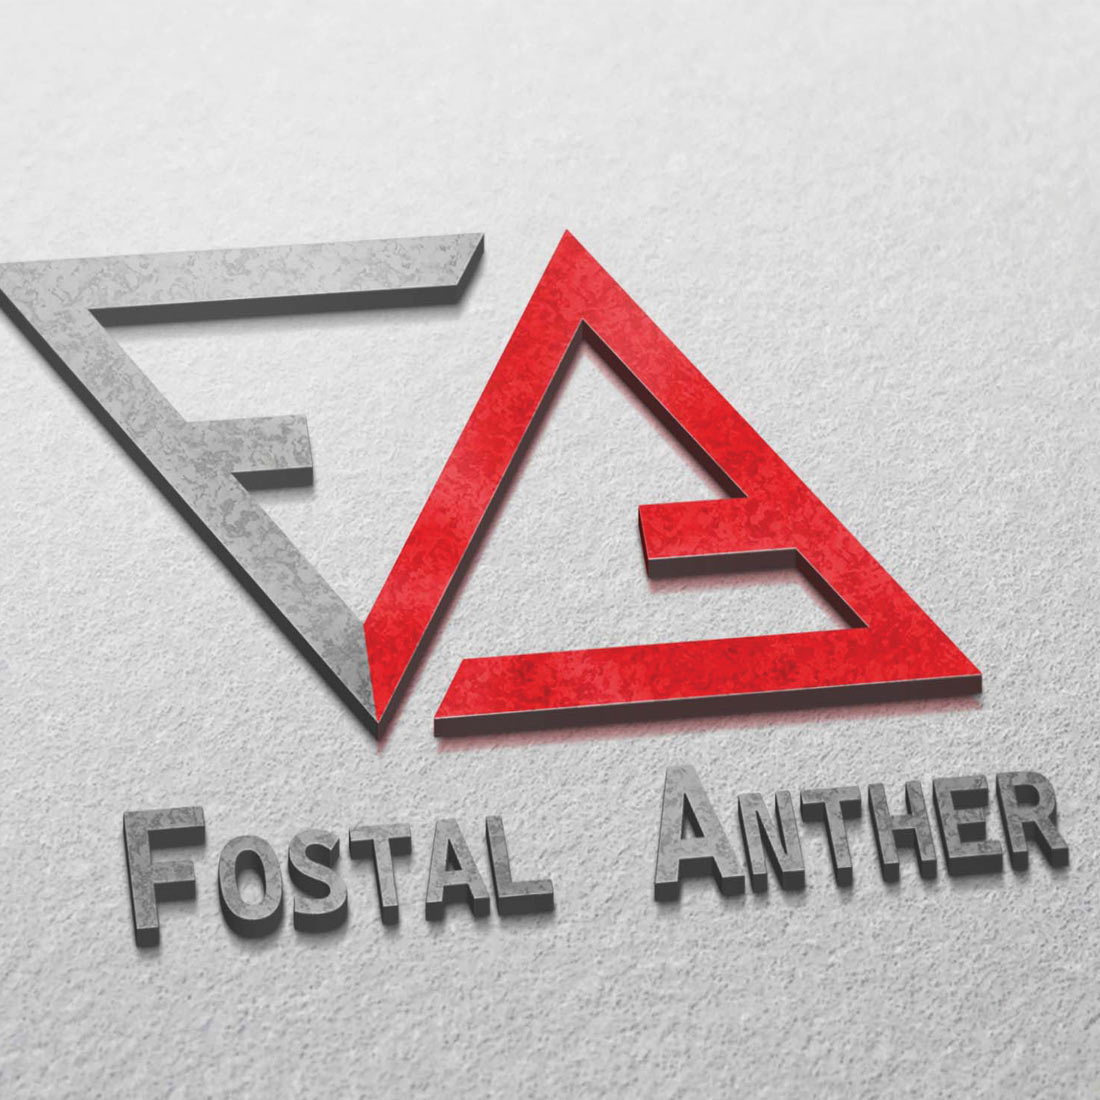 FA Fostal Anther Logo cover image.